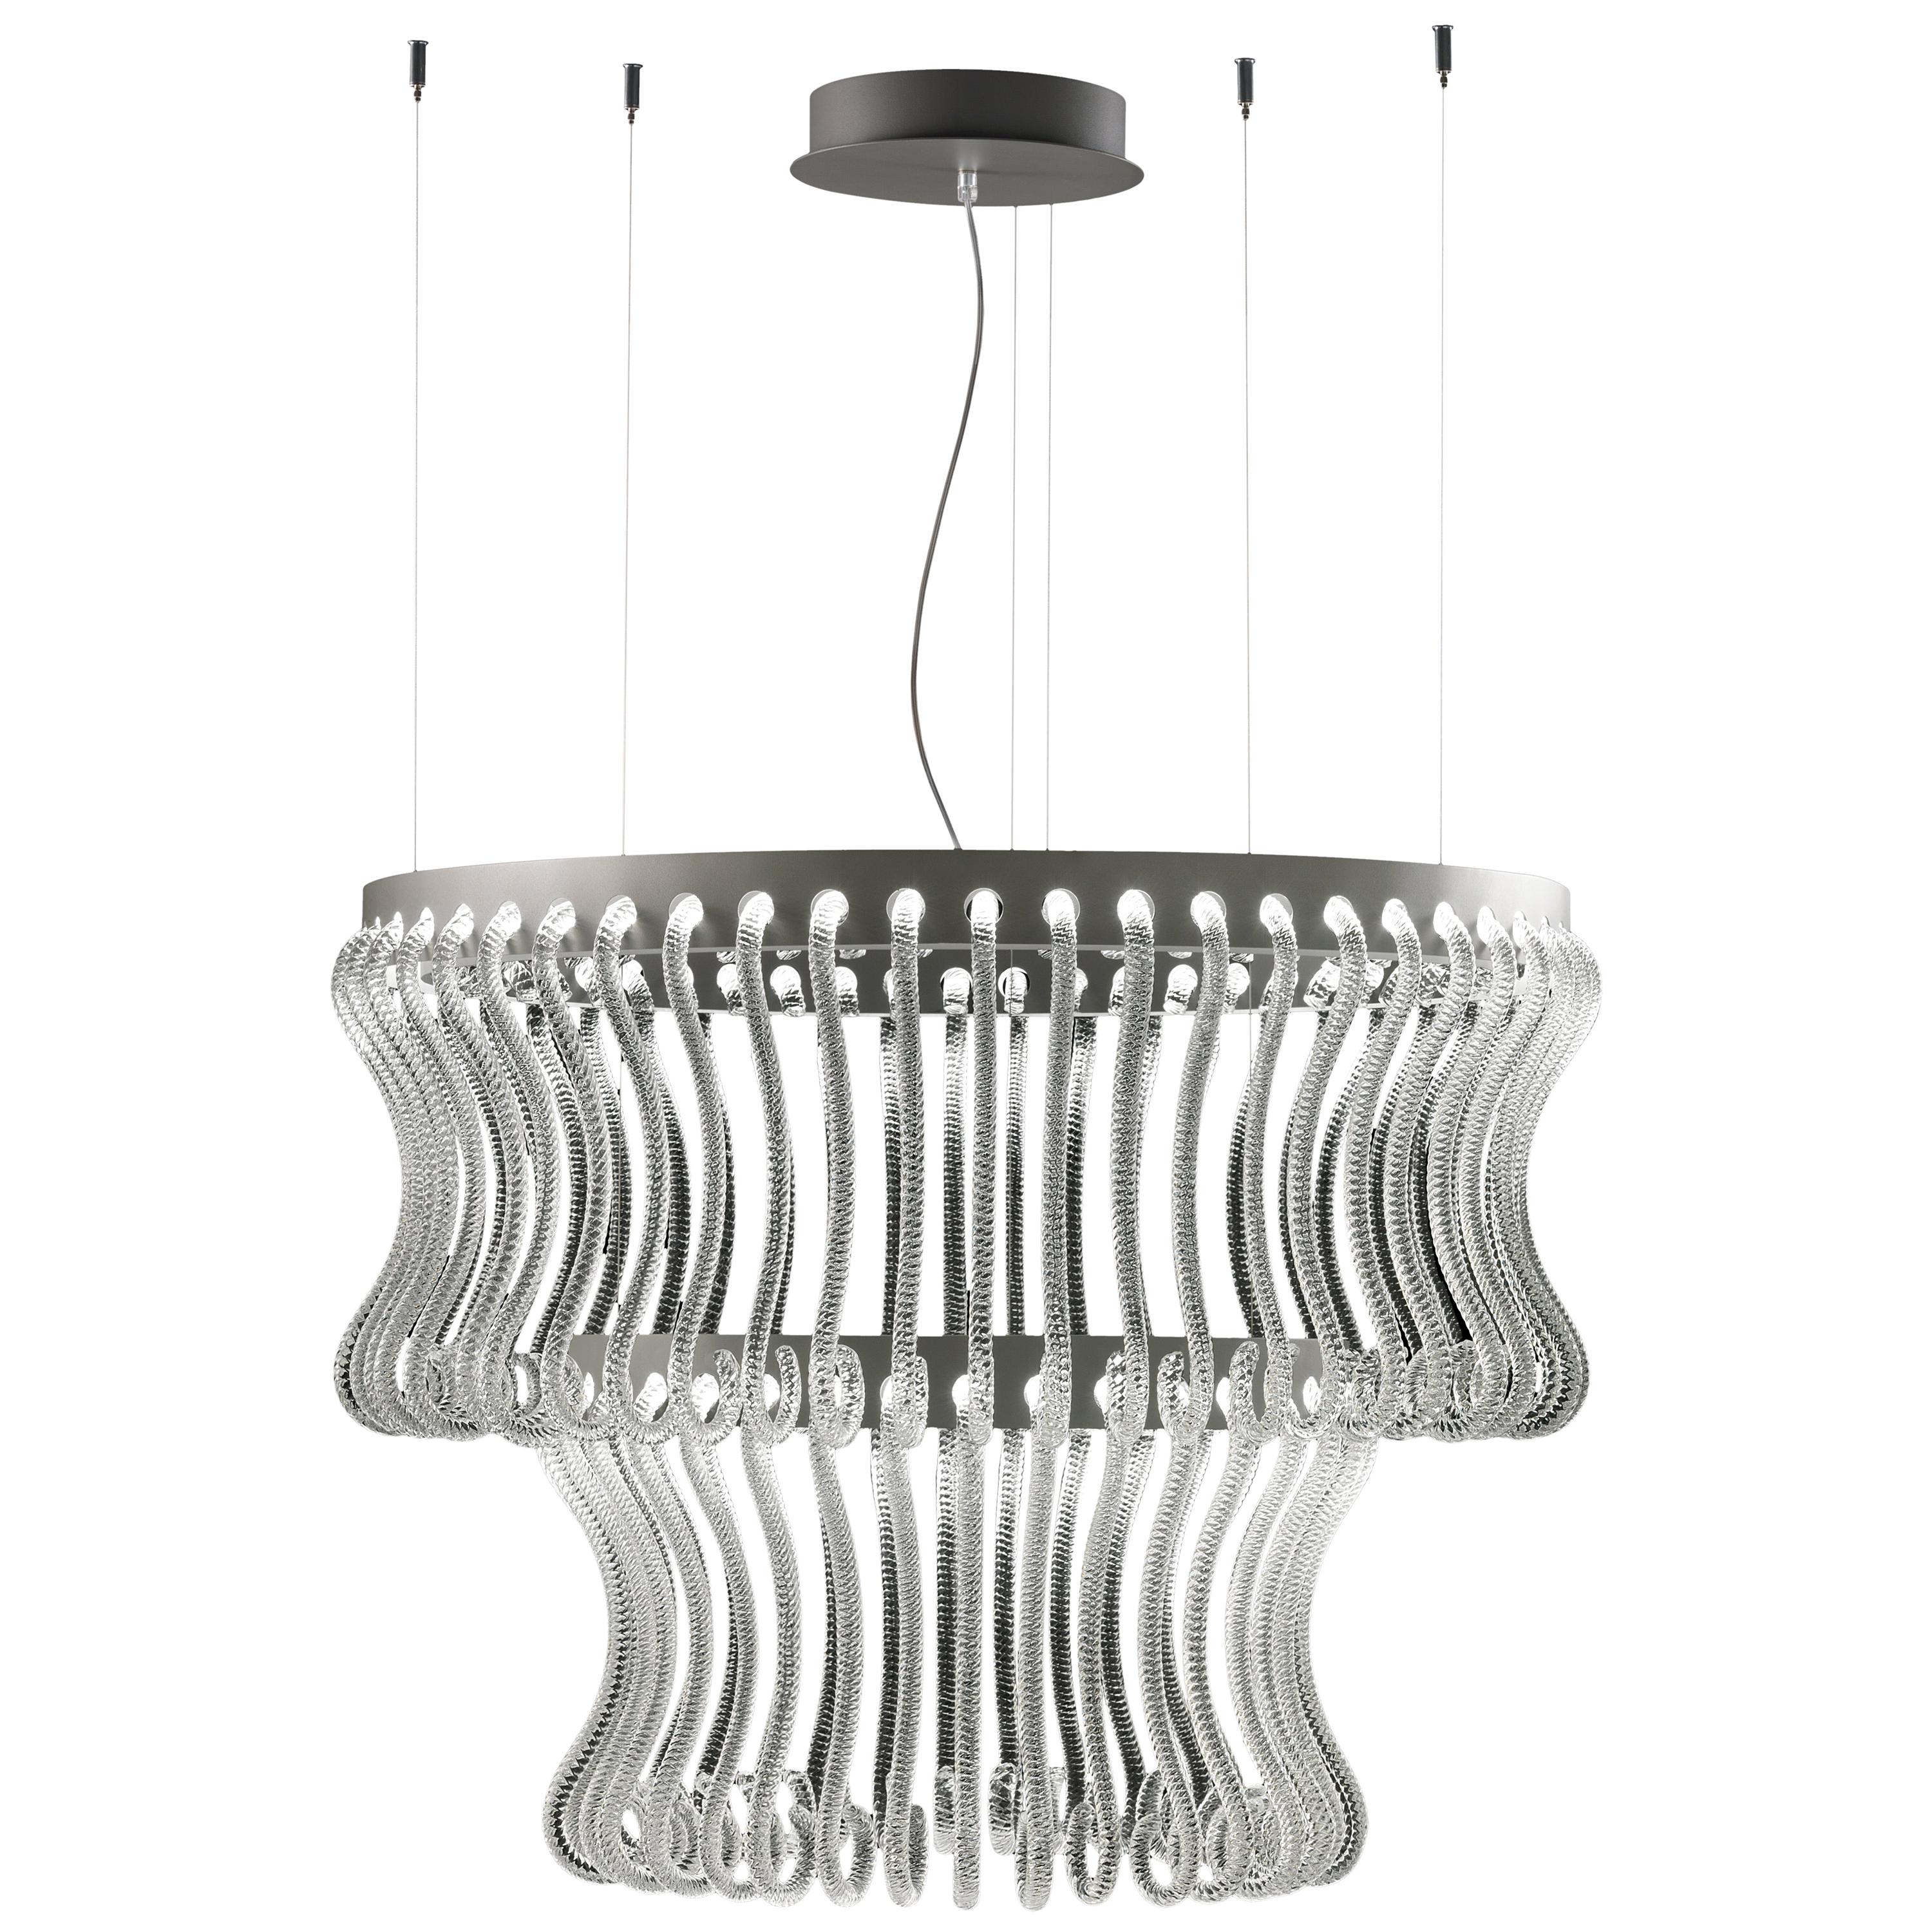 Crown 7337 Suspension Lamp in Glass, by Brian Rasmussen from Barovier&Toso